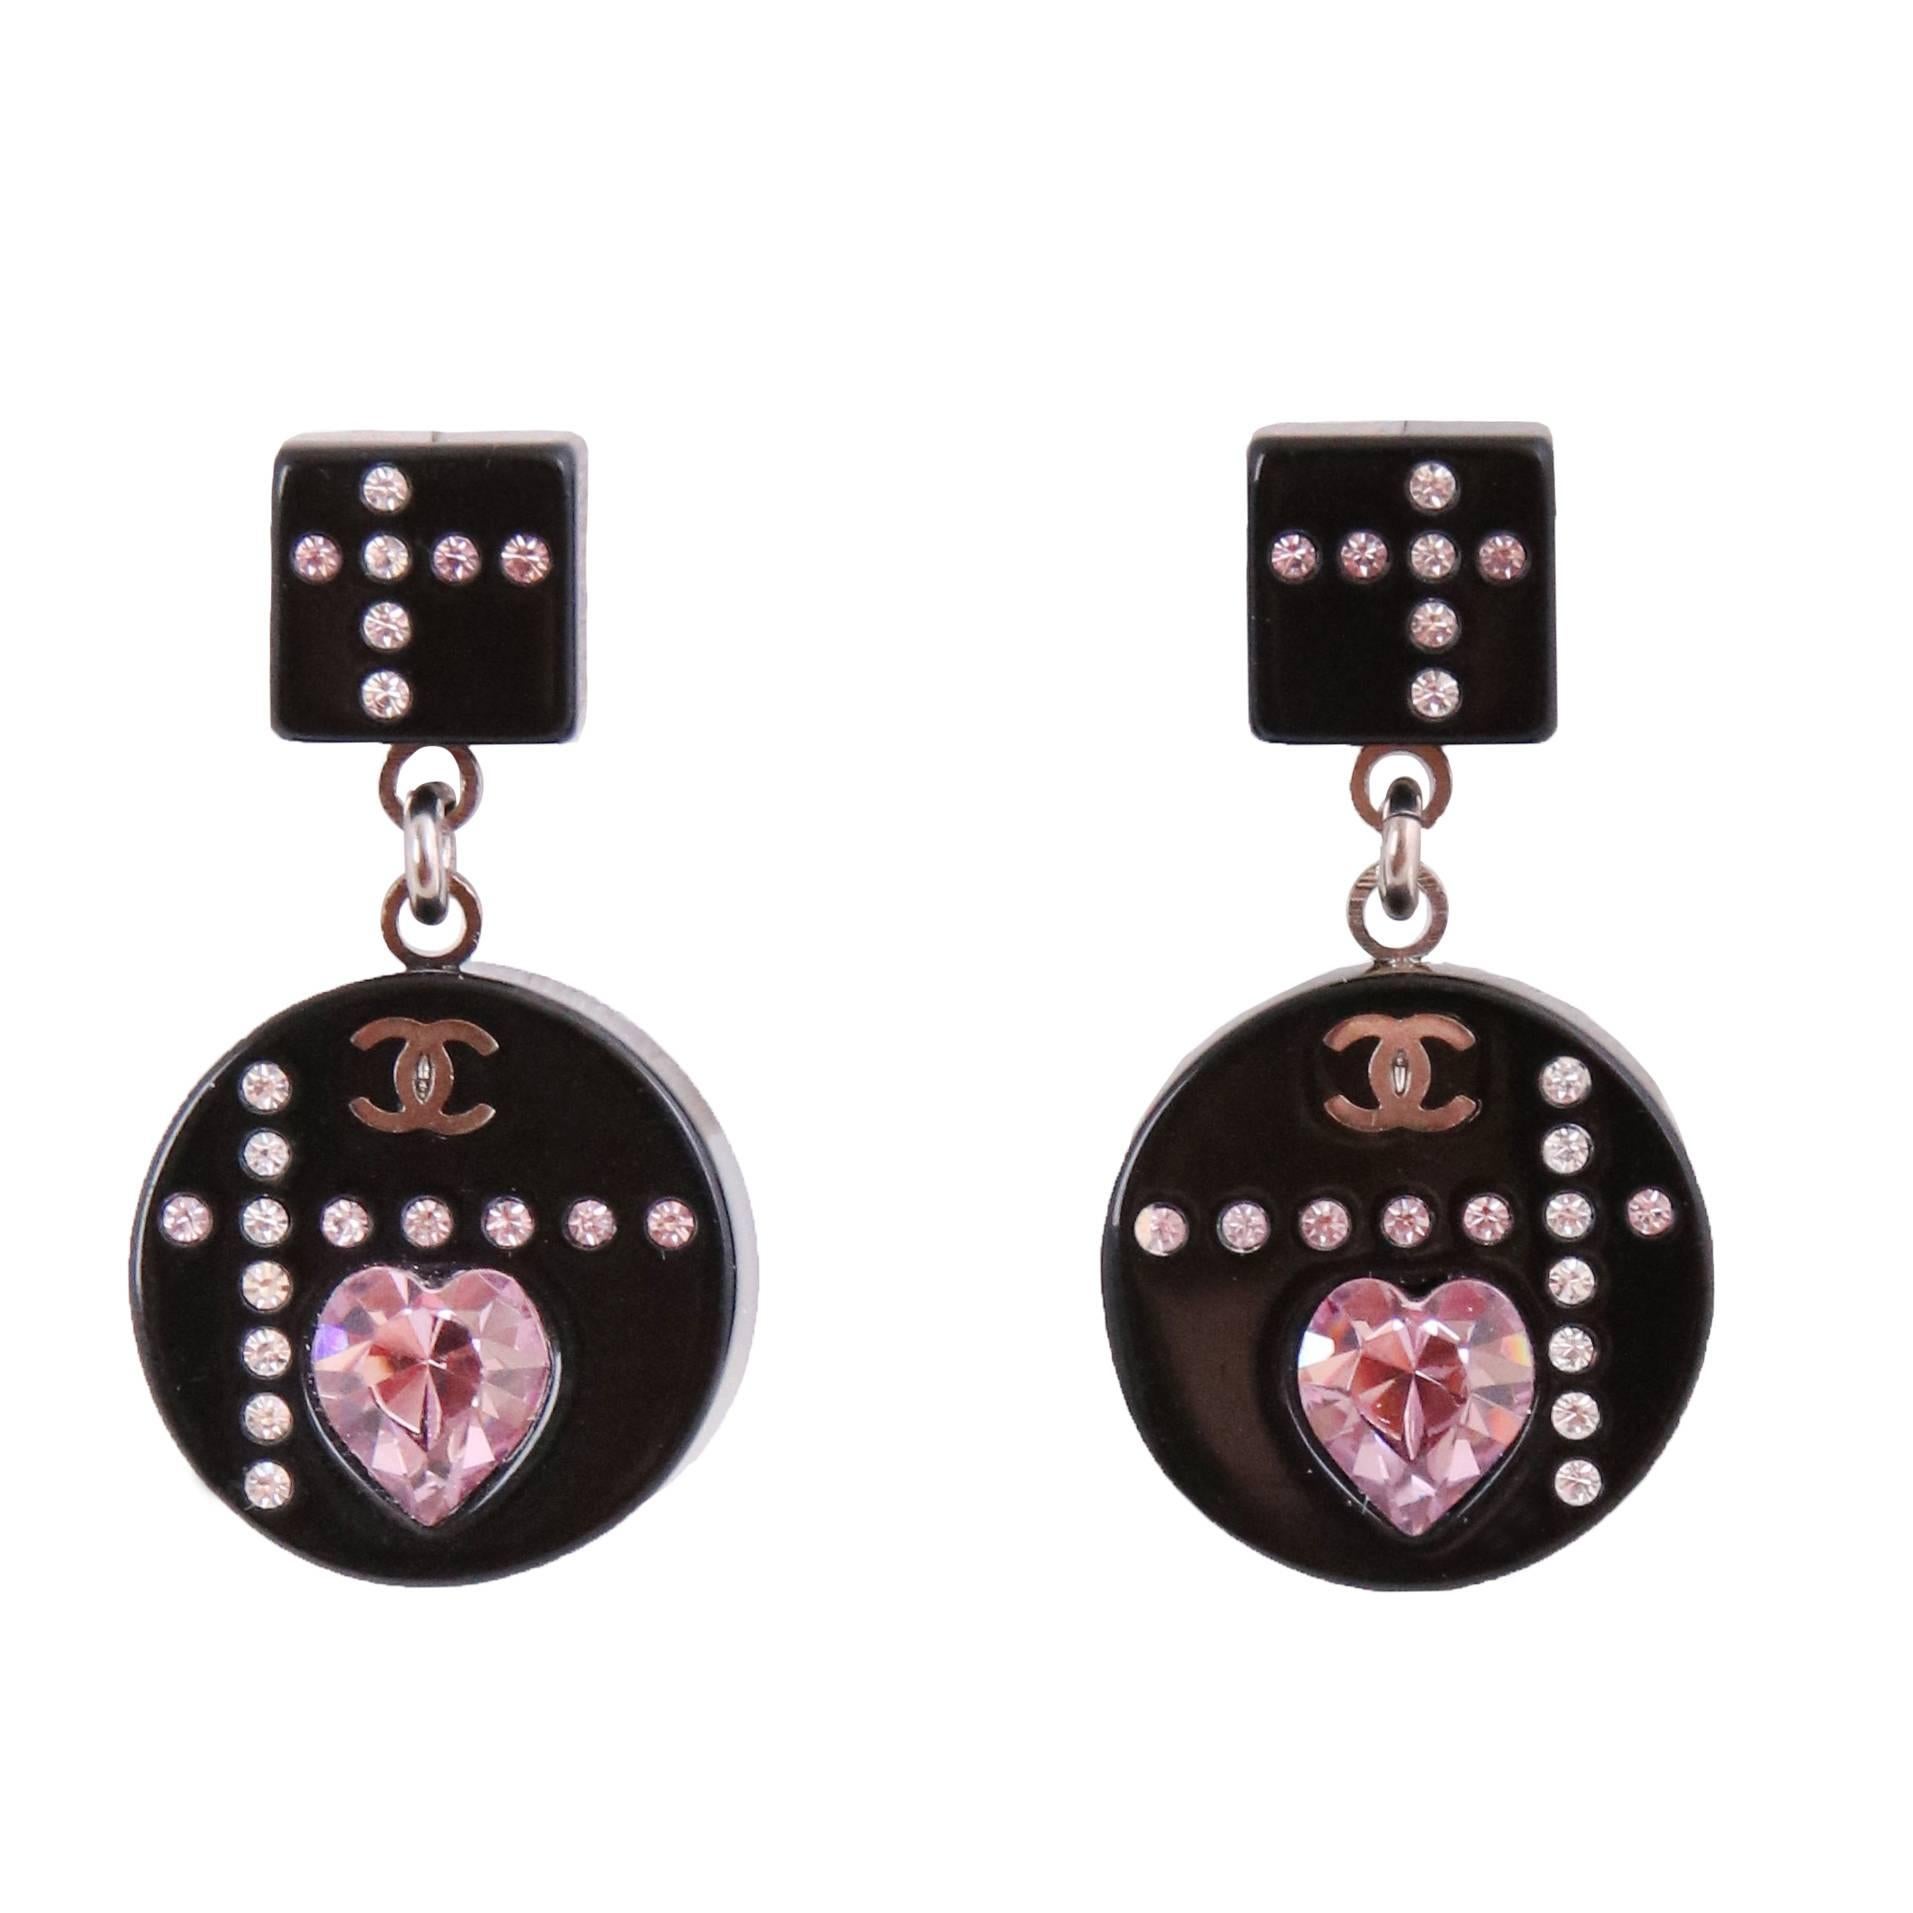 The cutest 2004A Chanel black resin pierced dangling earrings made of micro-crystals, a pink crystal heart and featuring a mini CC logo - arranged in a graphic pattern. In excellent condition.
MEASUREMENTS:
Overall Length - (approx.) 1 1/8